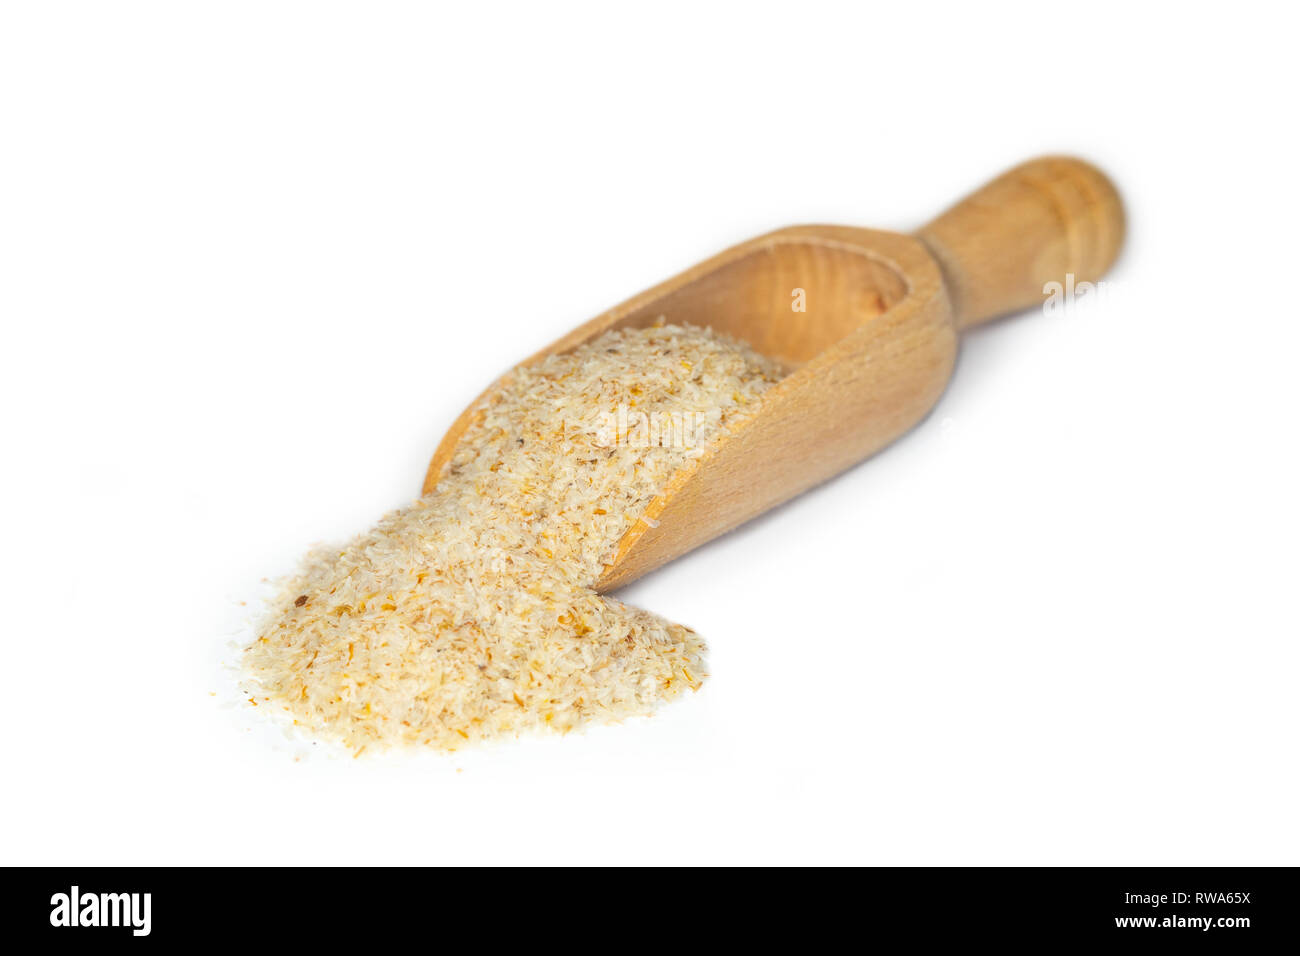 Closeup of grounded psyllium or plantago ovata presented on a small wooden scoop Stock Photo